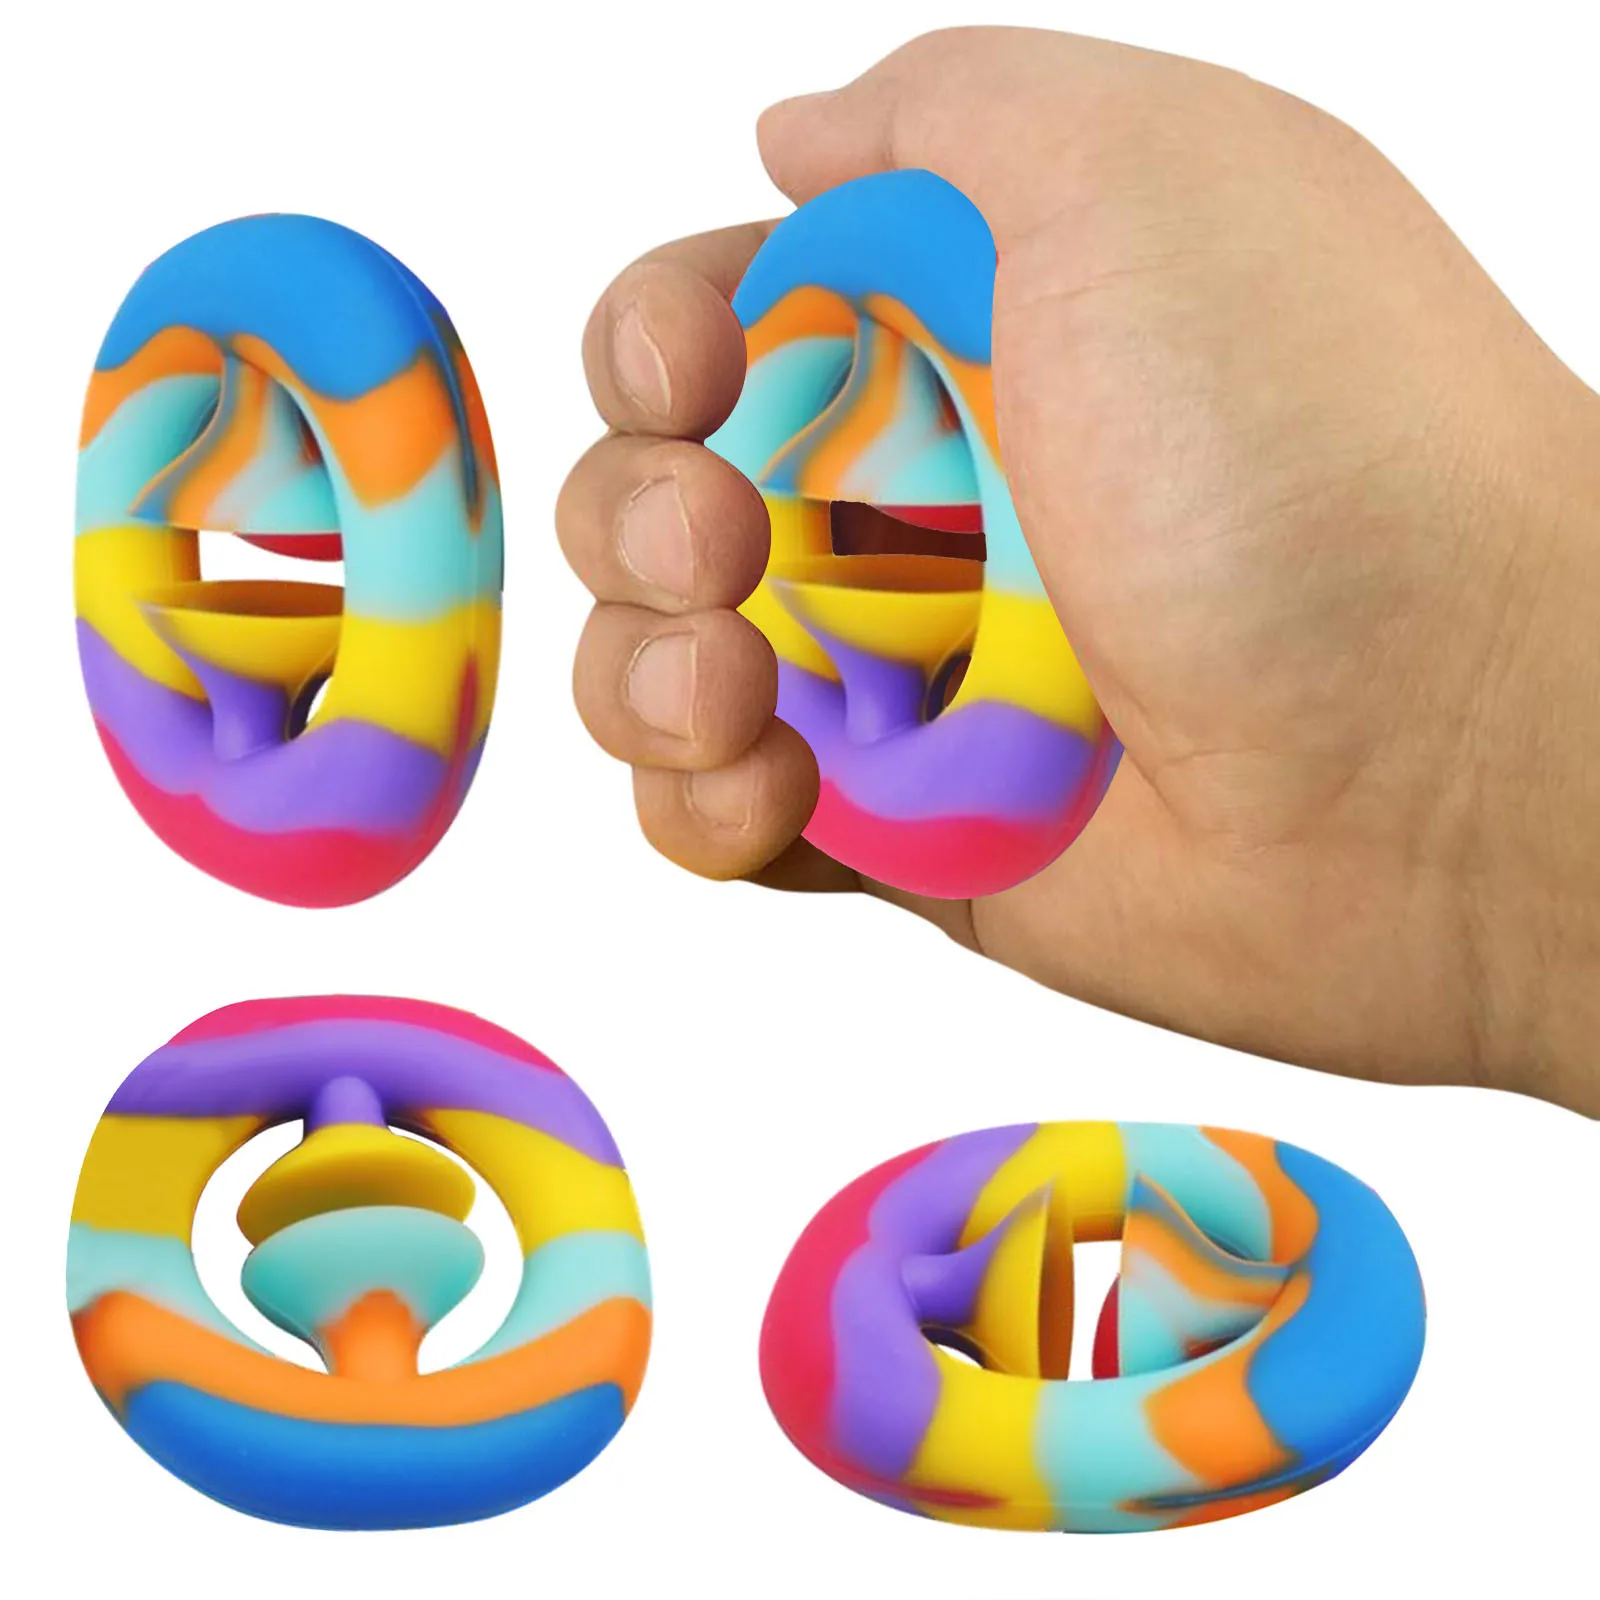 Figet Toys Ring Ball Antistress-Toys Autism Special Needs Anxiety Hand-Grip Reliever-Grip